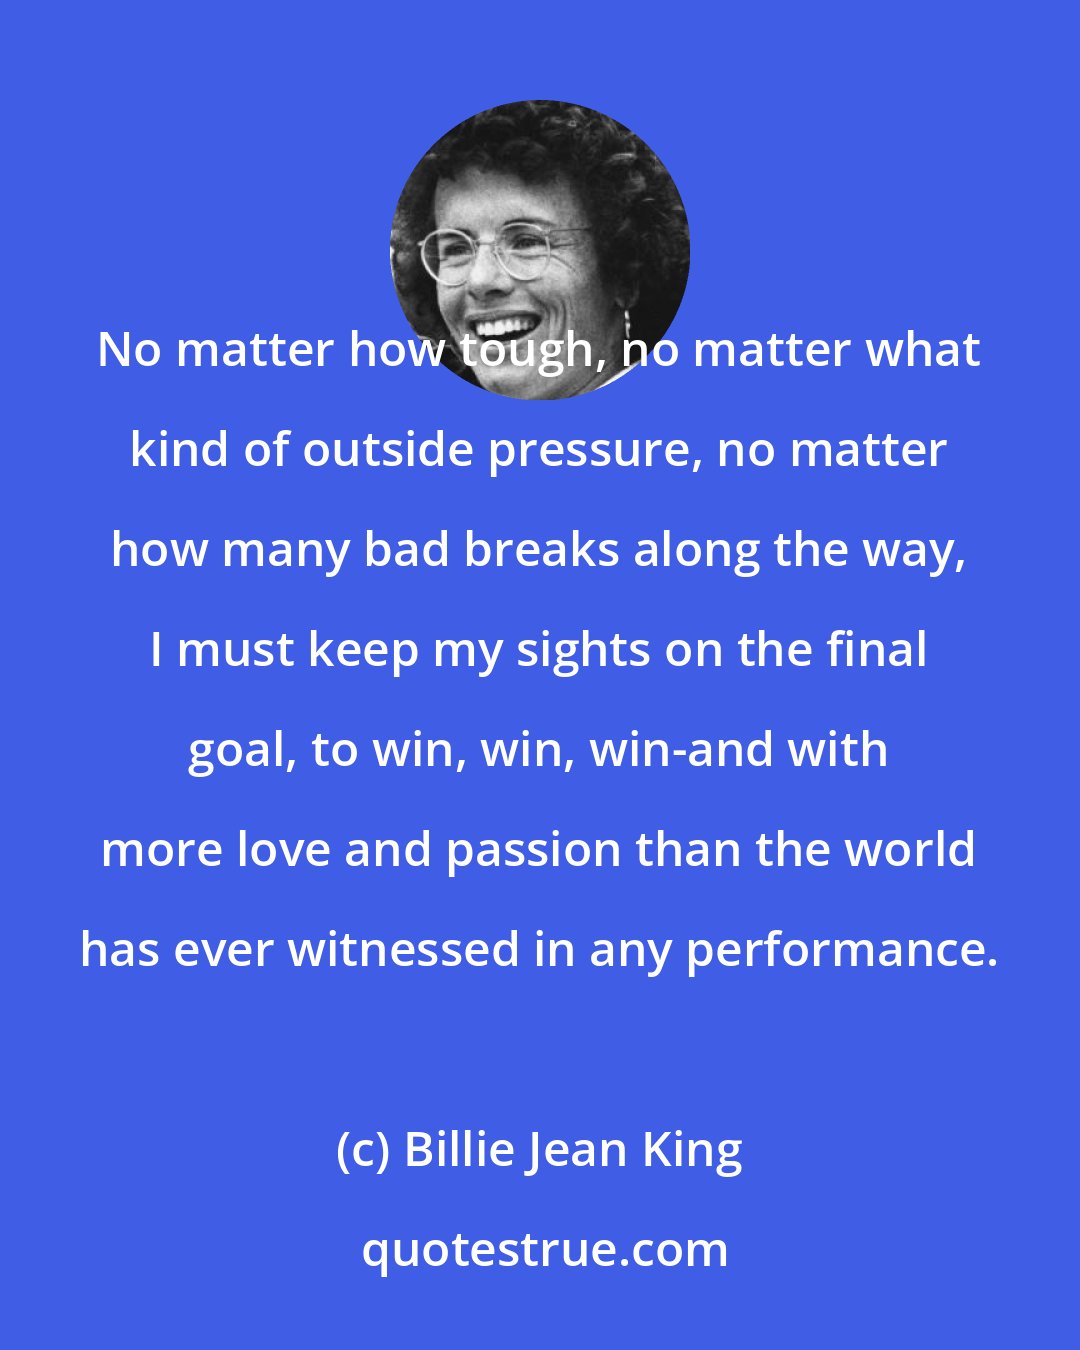 Billie Jean King: No matter how tough, no matter what kind of outside pressure, no matter how many bad breaks along the way, I must keep my sights on the final goal, to win, win, win-and with more love and passion than the world has ever witnessed in any performance.